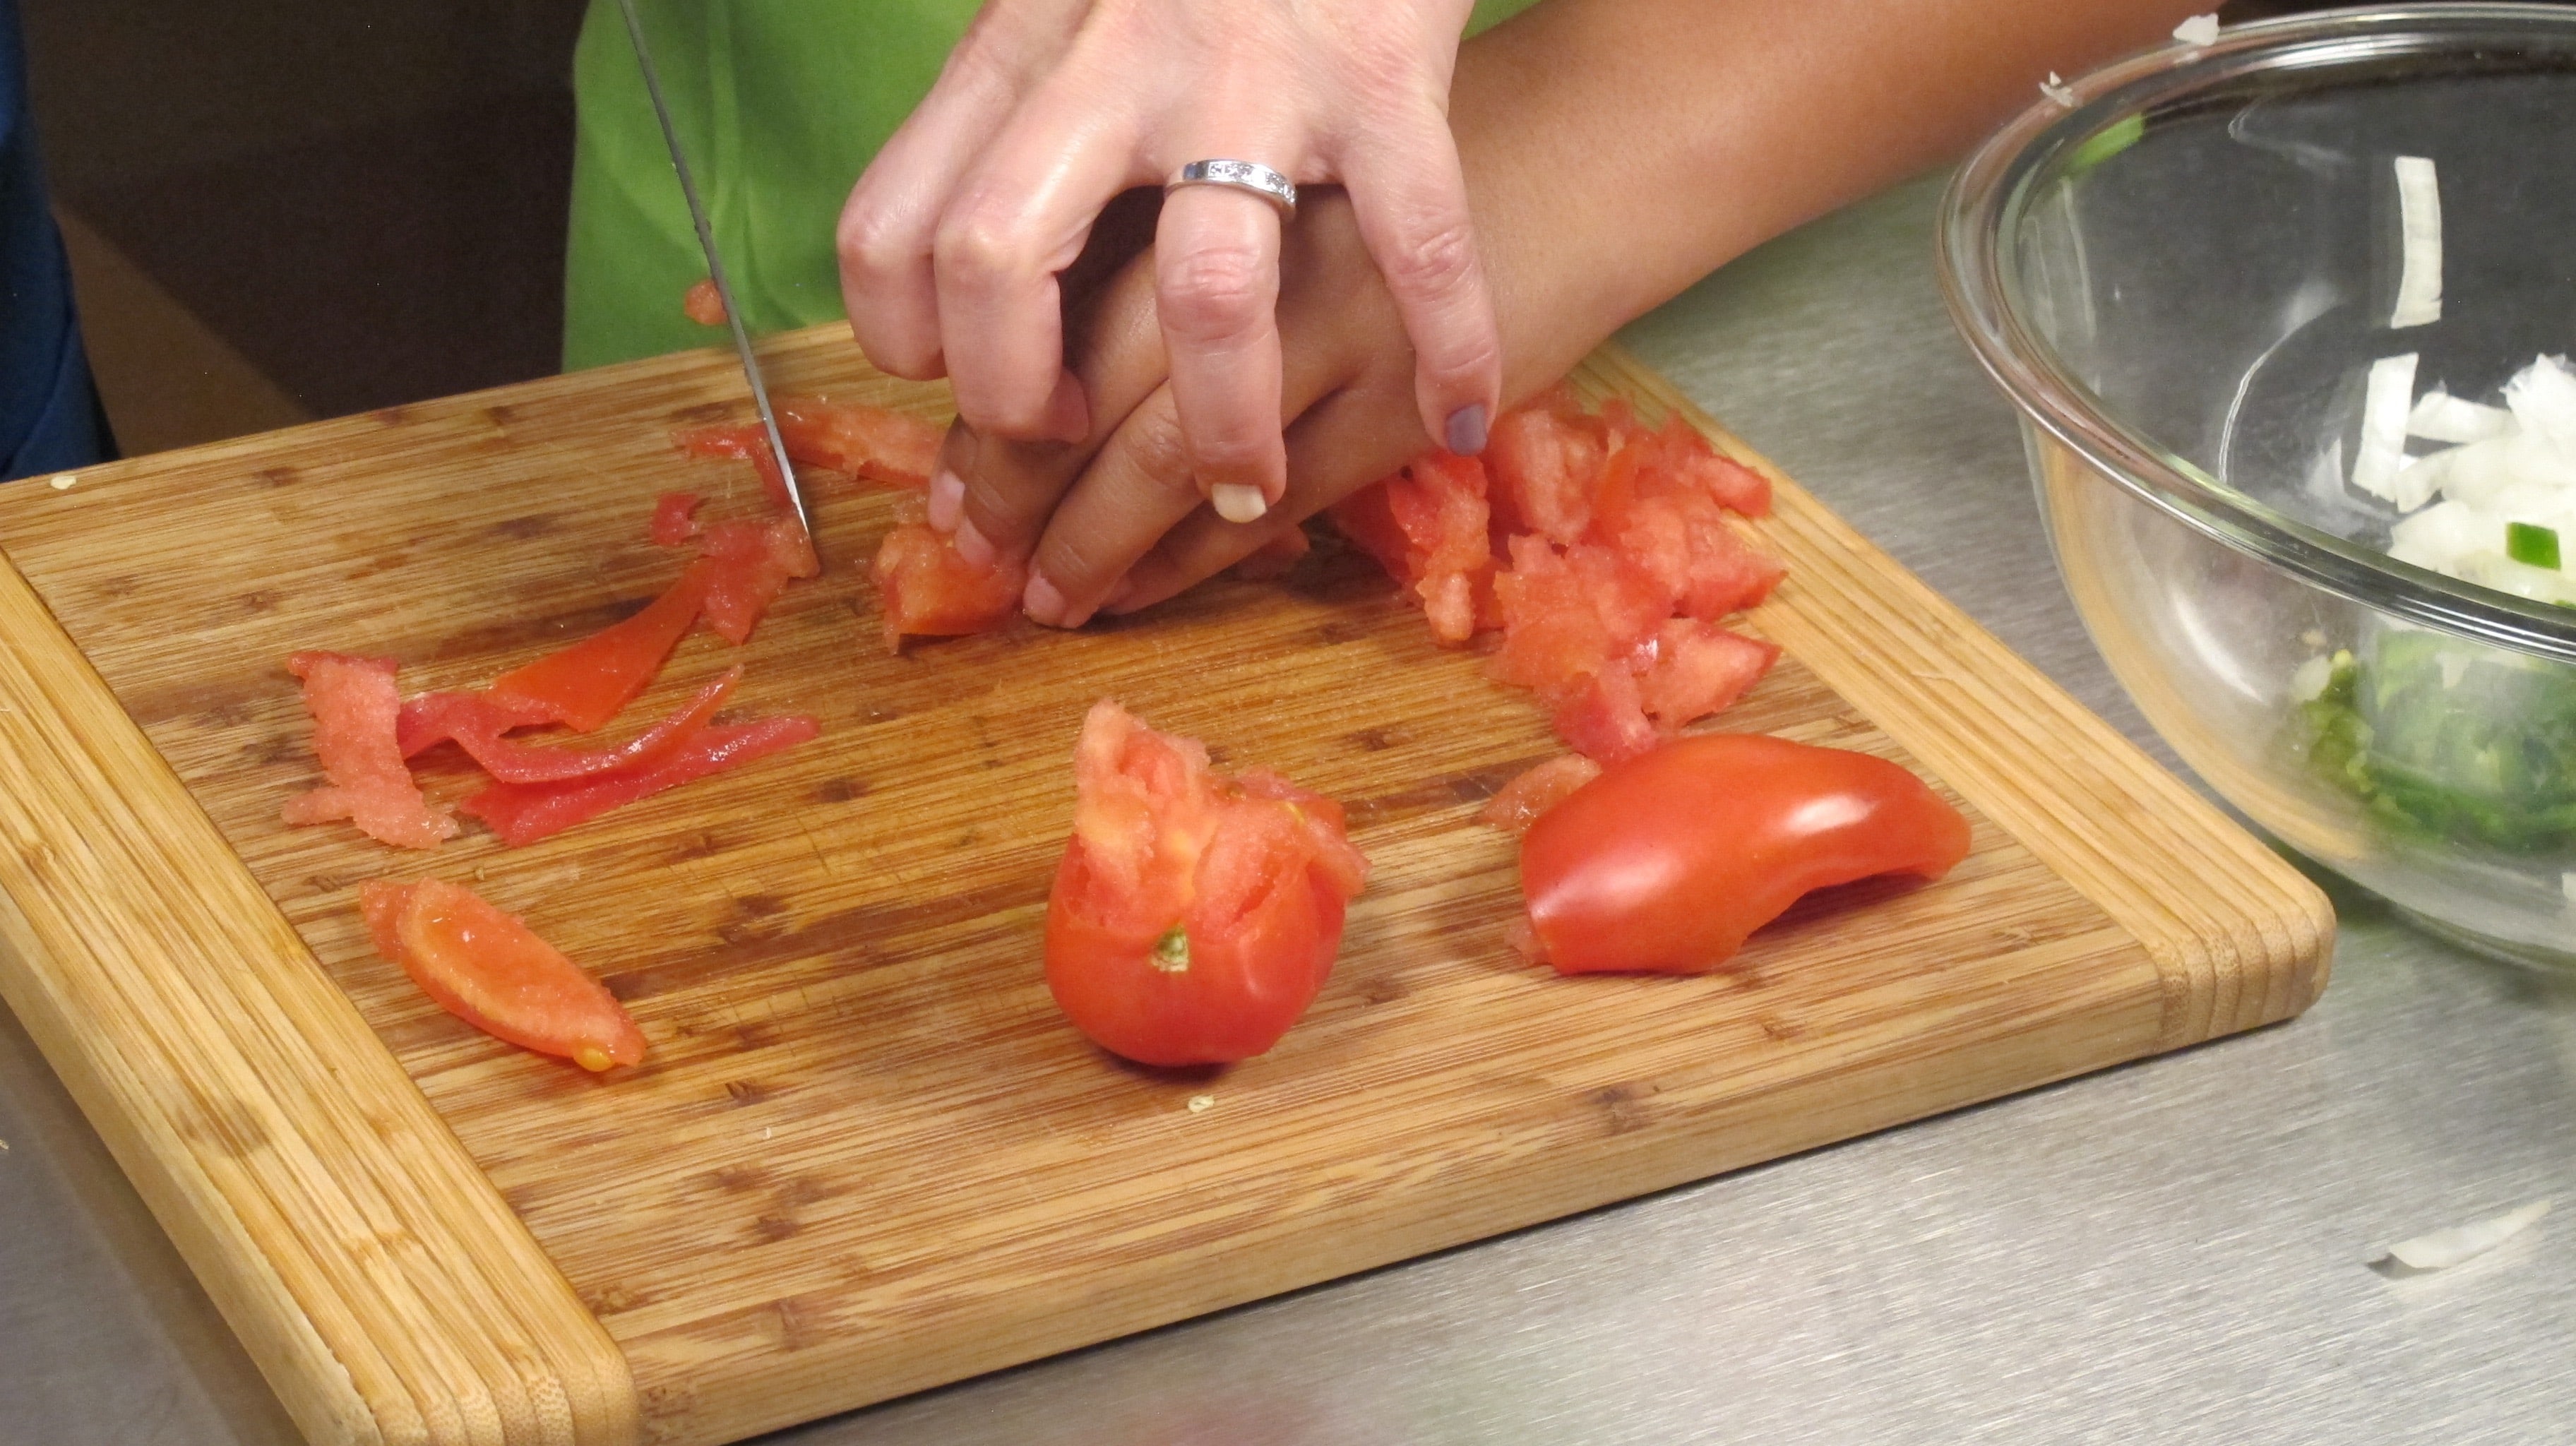 Cut tomatoes in half. Scoop or squeeze out seeds and throw away. Chop tomatoes and place in bowl.